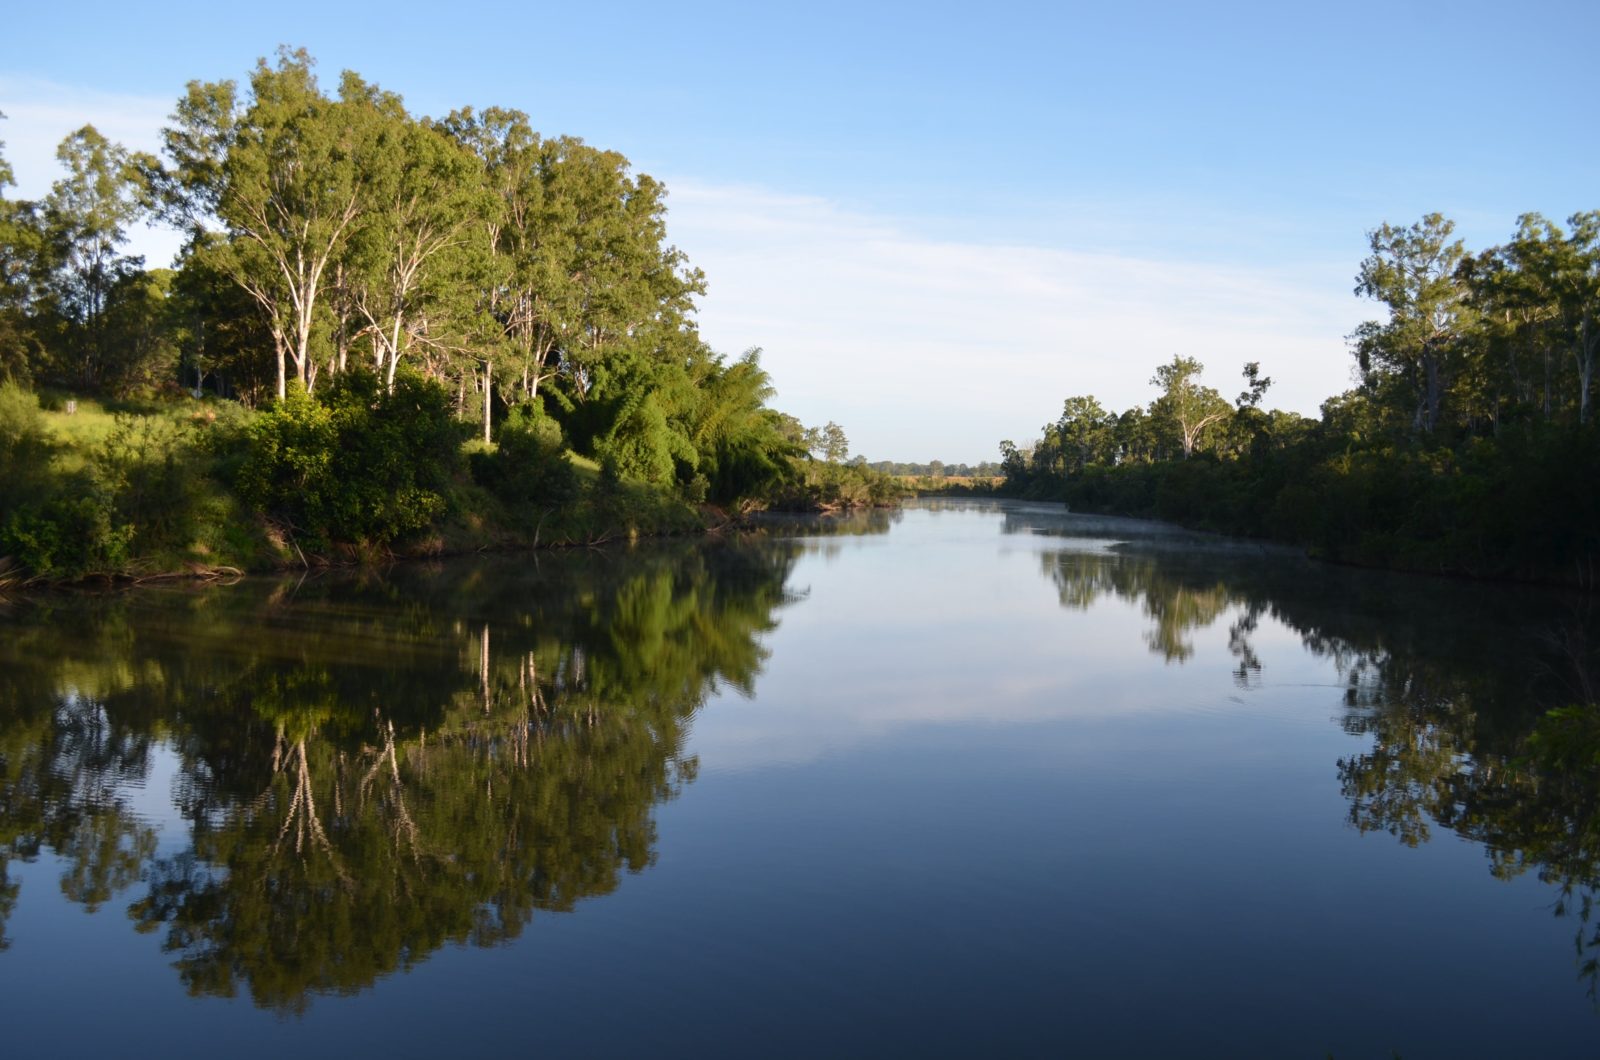 photo showing the Mary River at Tiaro with a calm reflective surface and lined by trees